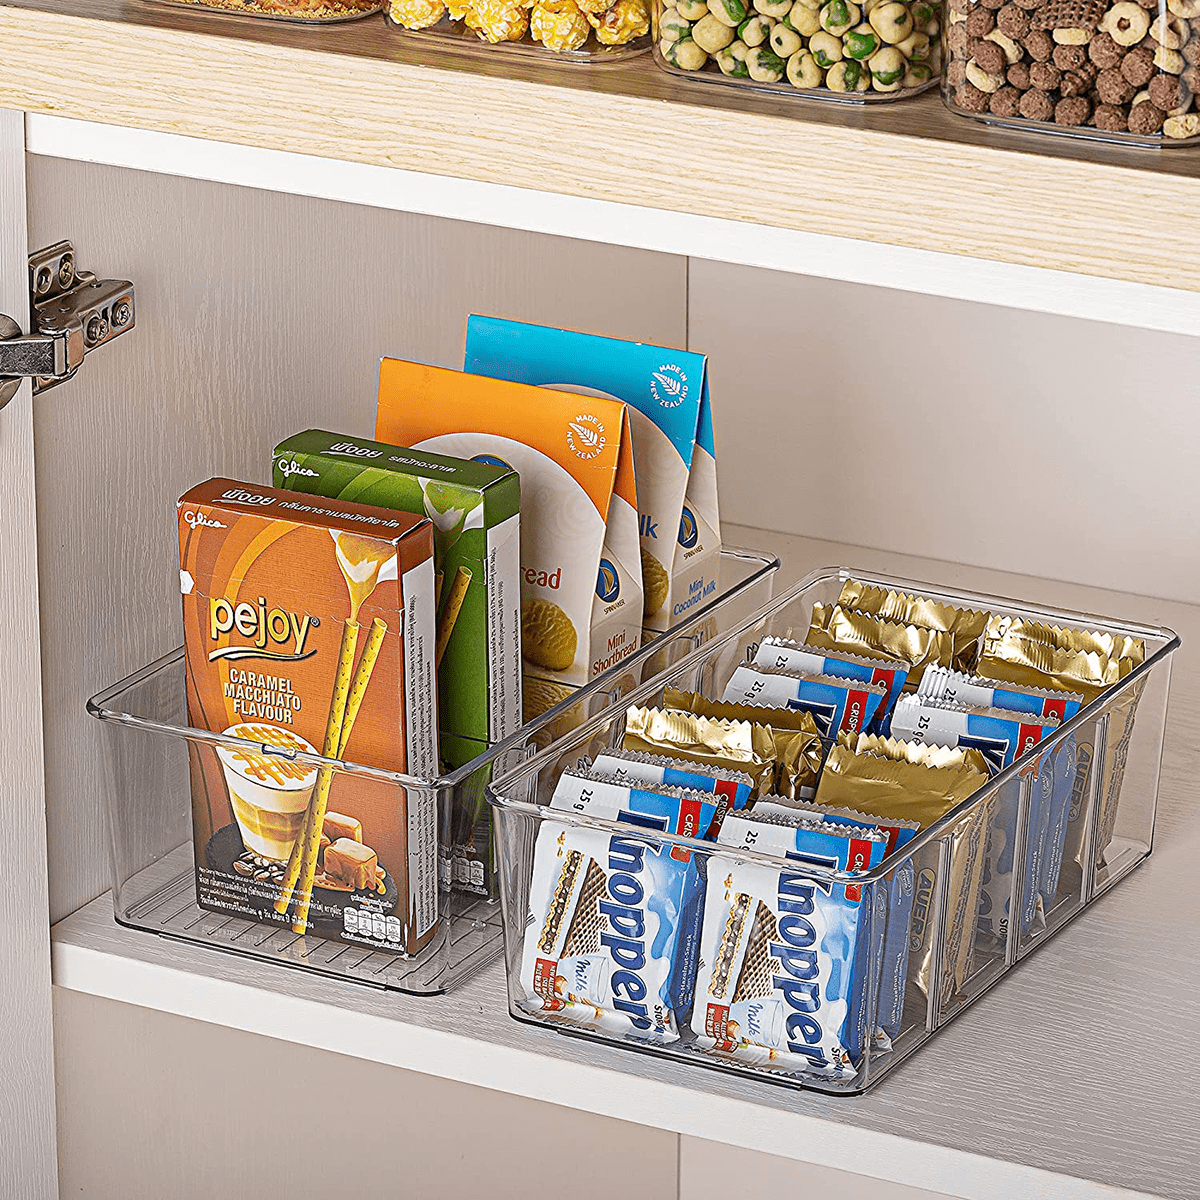 https://www.tasteofhome.com/wp-content/uploads/2023/01/storage-bins-with-dividers-via-amazon.com-ecomm.png?fit=700%2C700